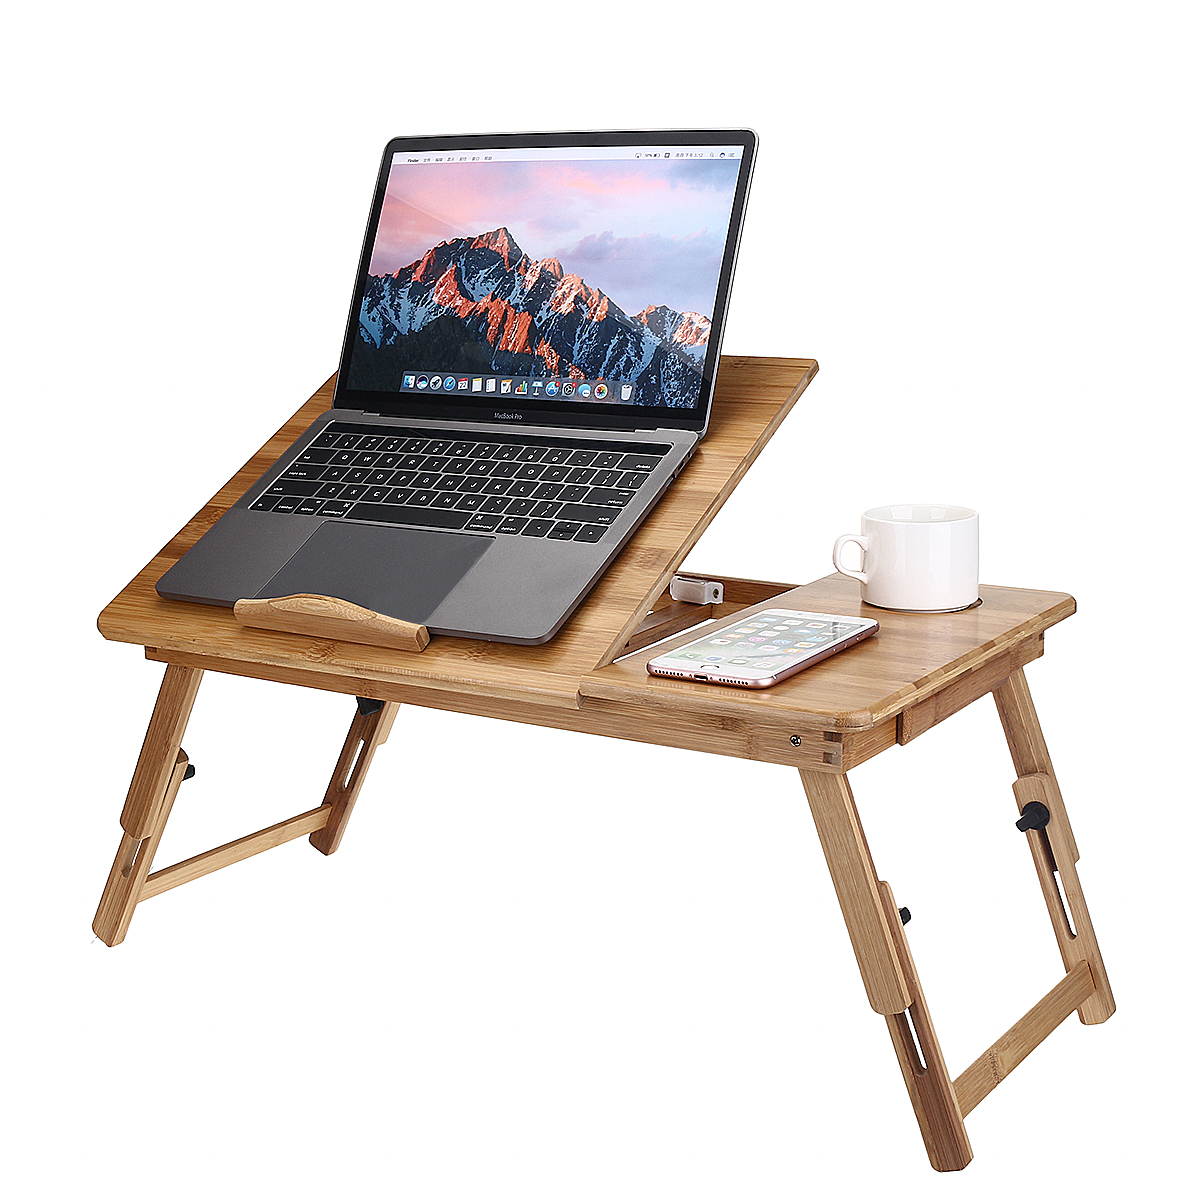 Bamboo-Laptop-Desk-Stand-Lap-Desk-Table-Flower-Pattern-Foldable-Breakfast-Serving-Bed-Tray-with-Stor-1798257-10